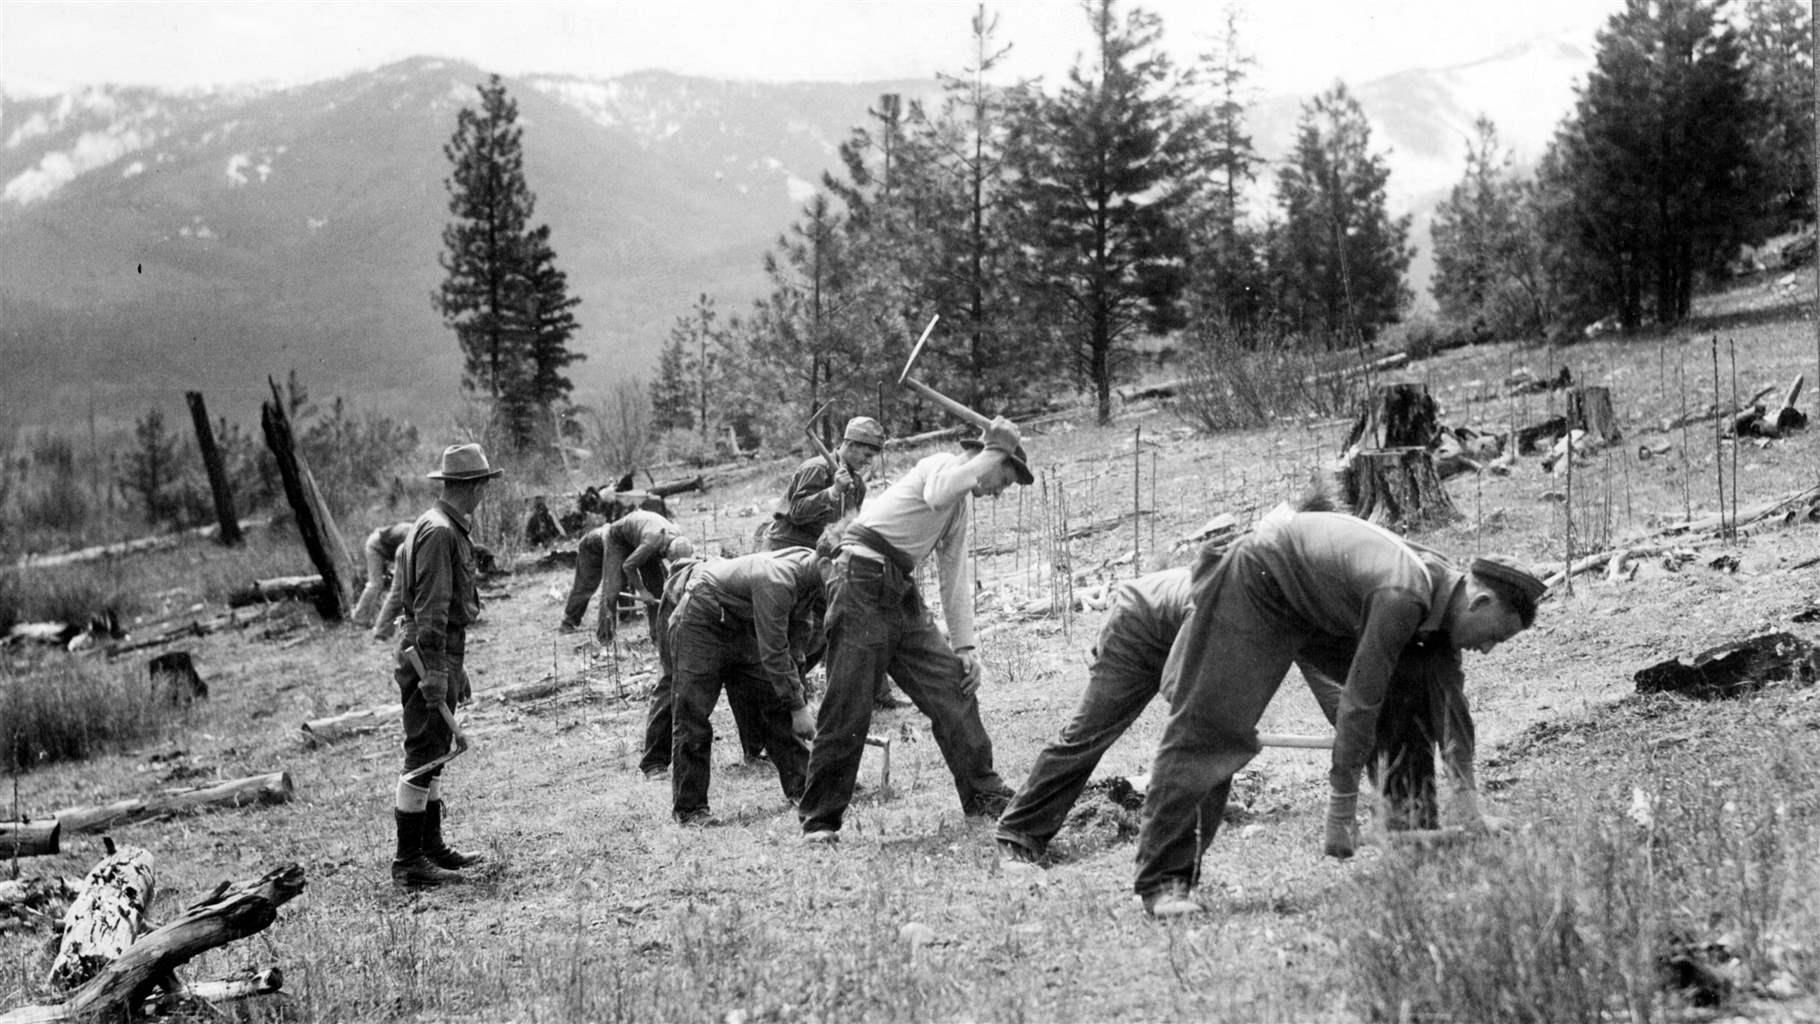 Members of the Civilian Conservation Corps, circa 1938